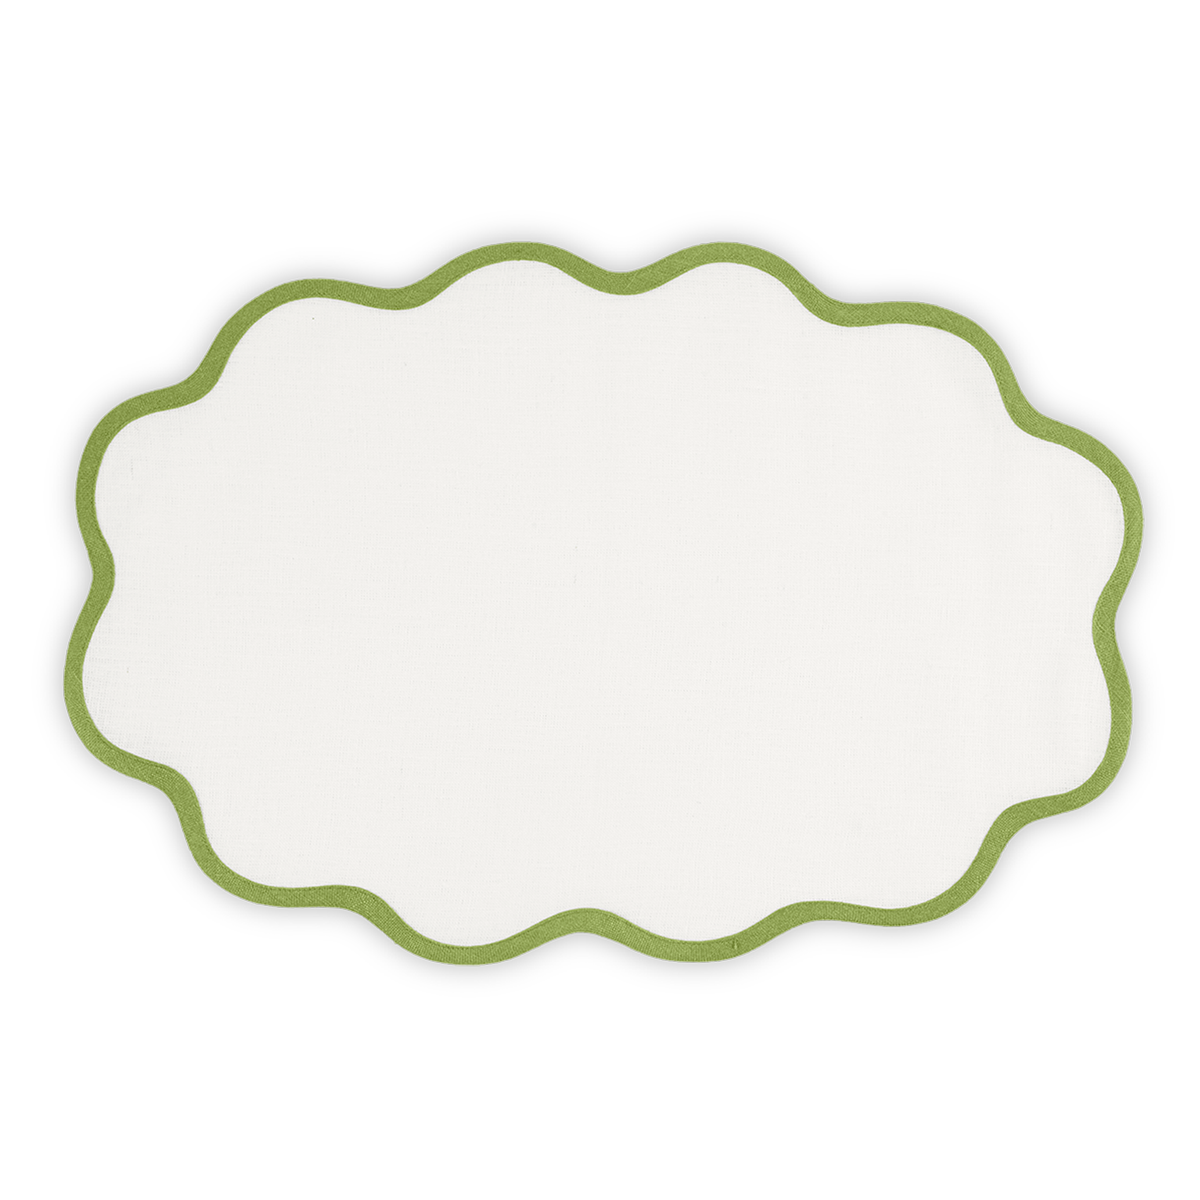 Oval Placemat of Matouk Scallop Edge Table Linens in Color Grass